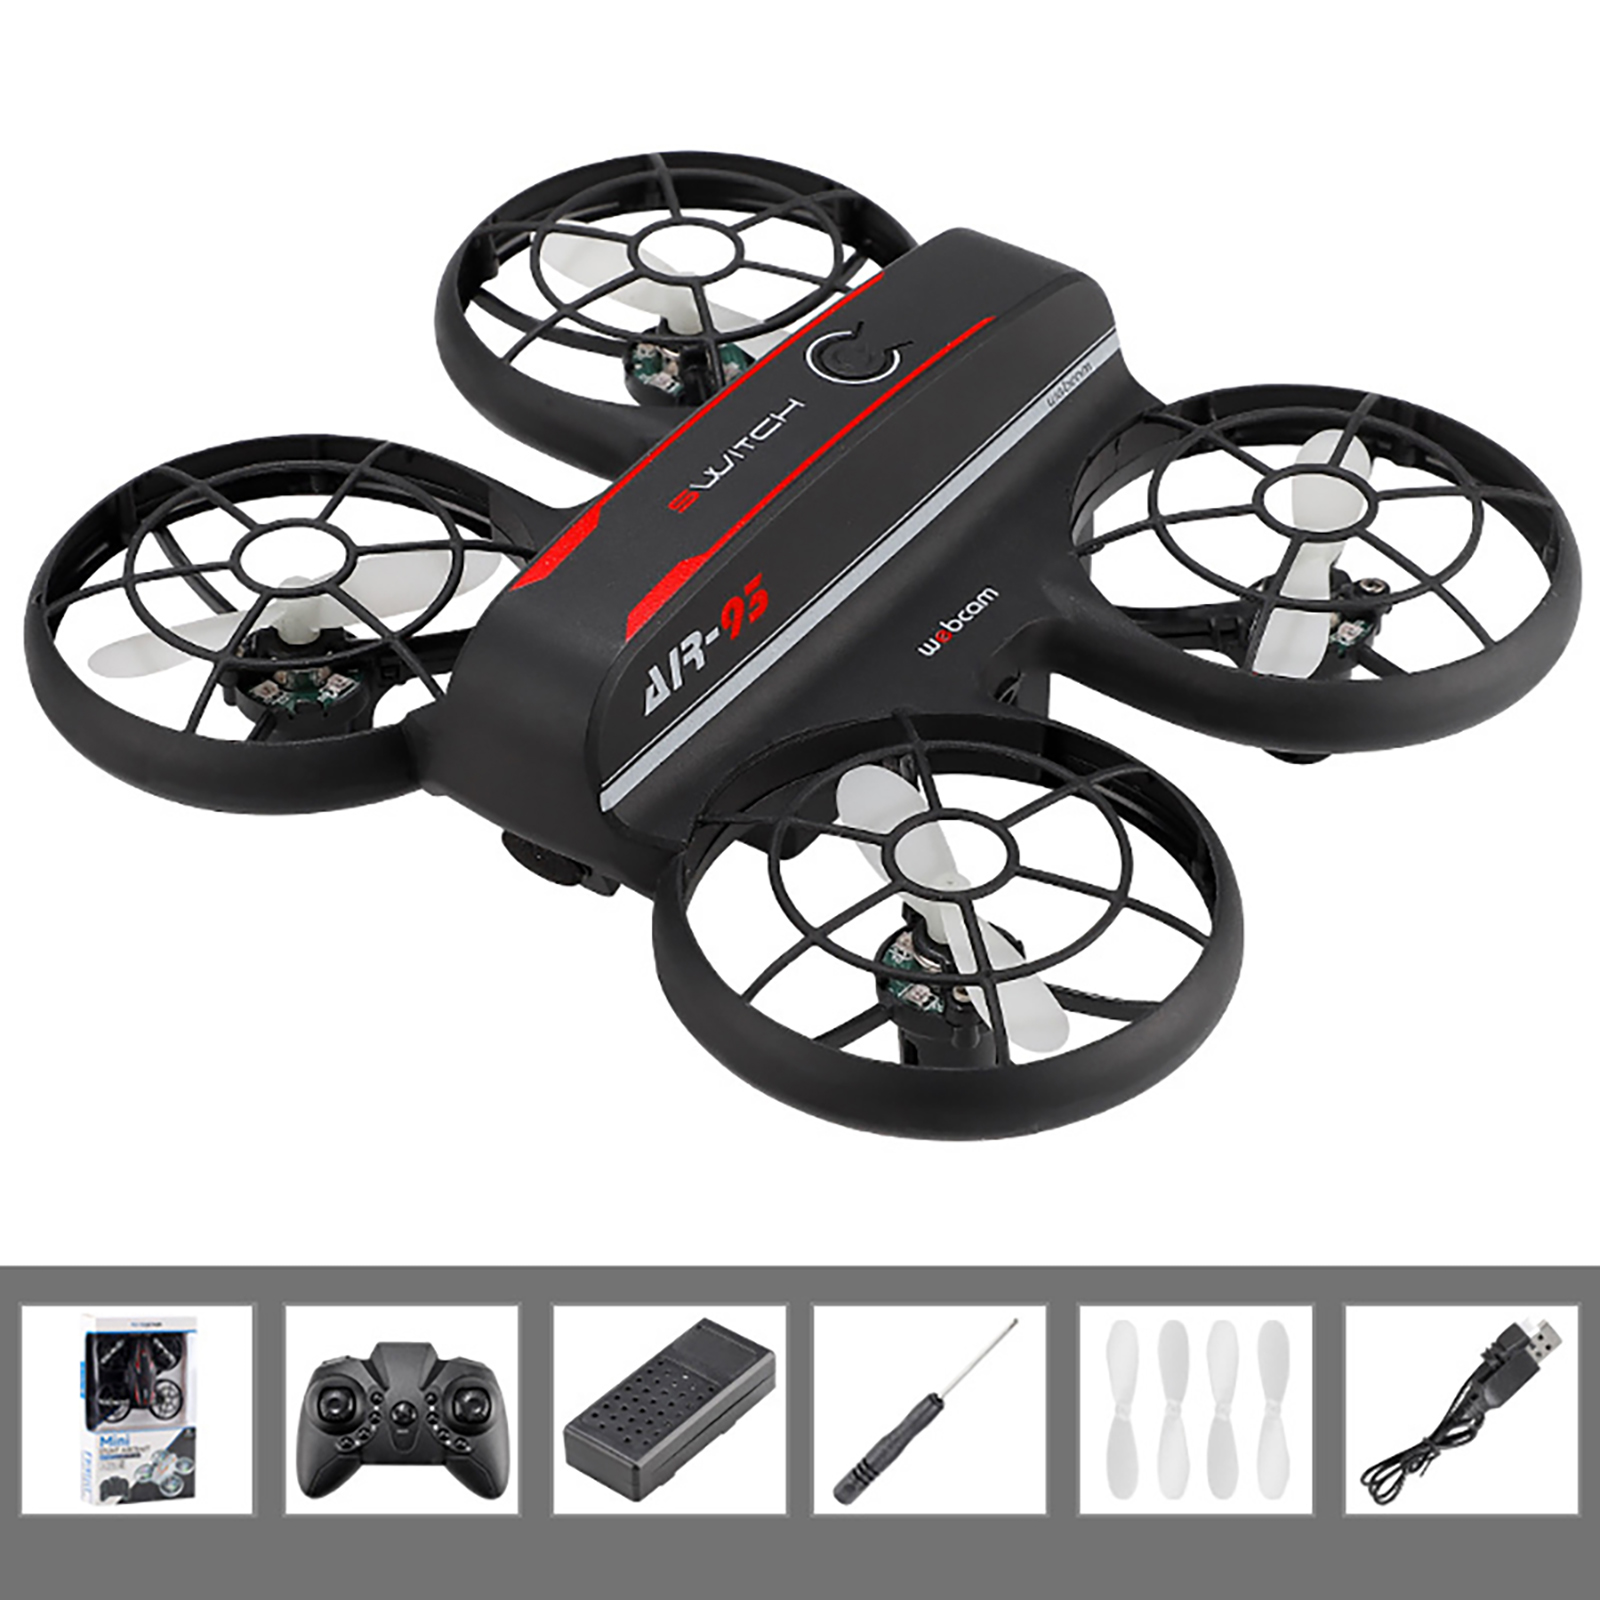 RC Drone Fixed Altitude 360 Degree Rotation Headless Mode Remote Control Quadcopter with LED Colorful Lights